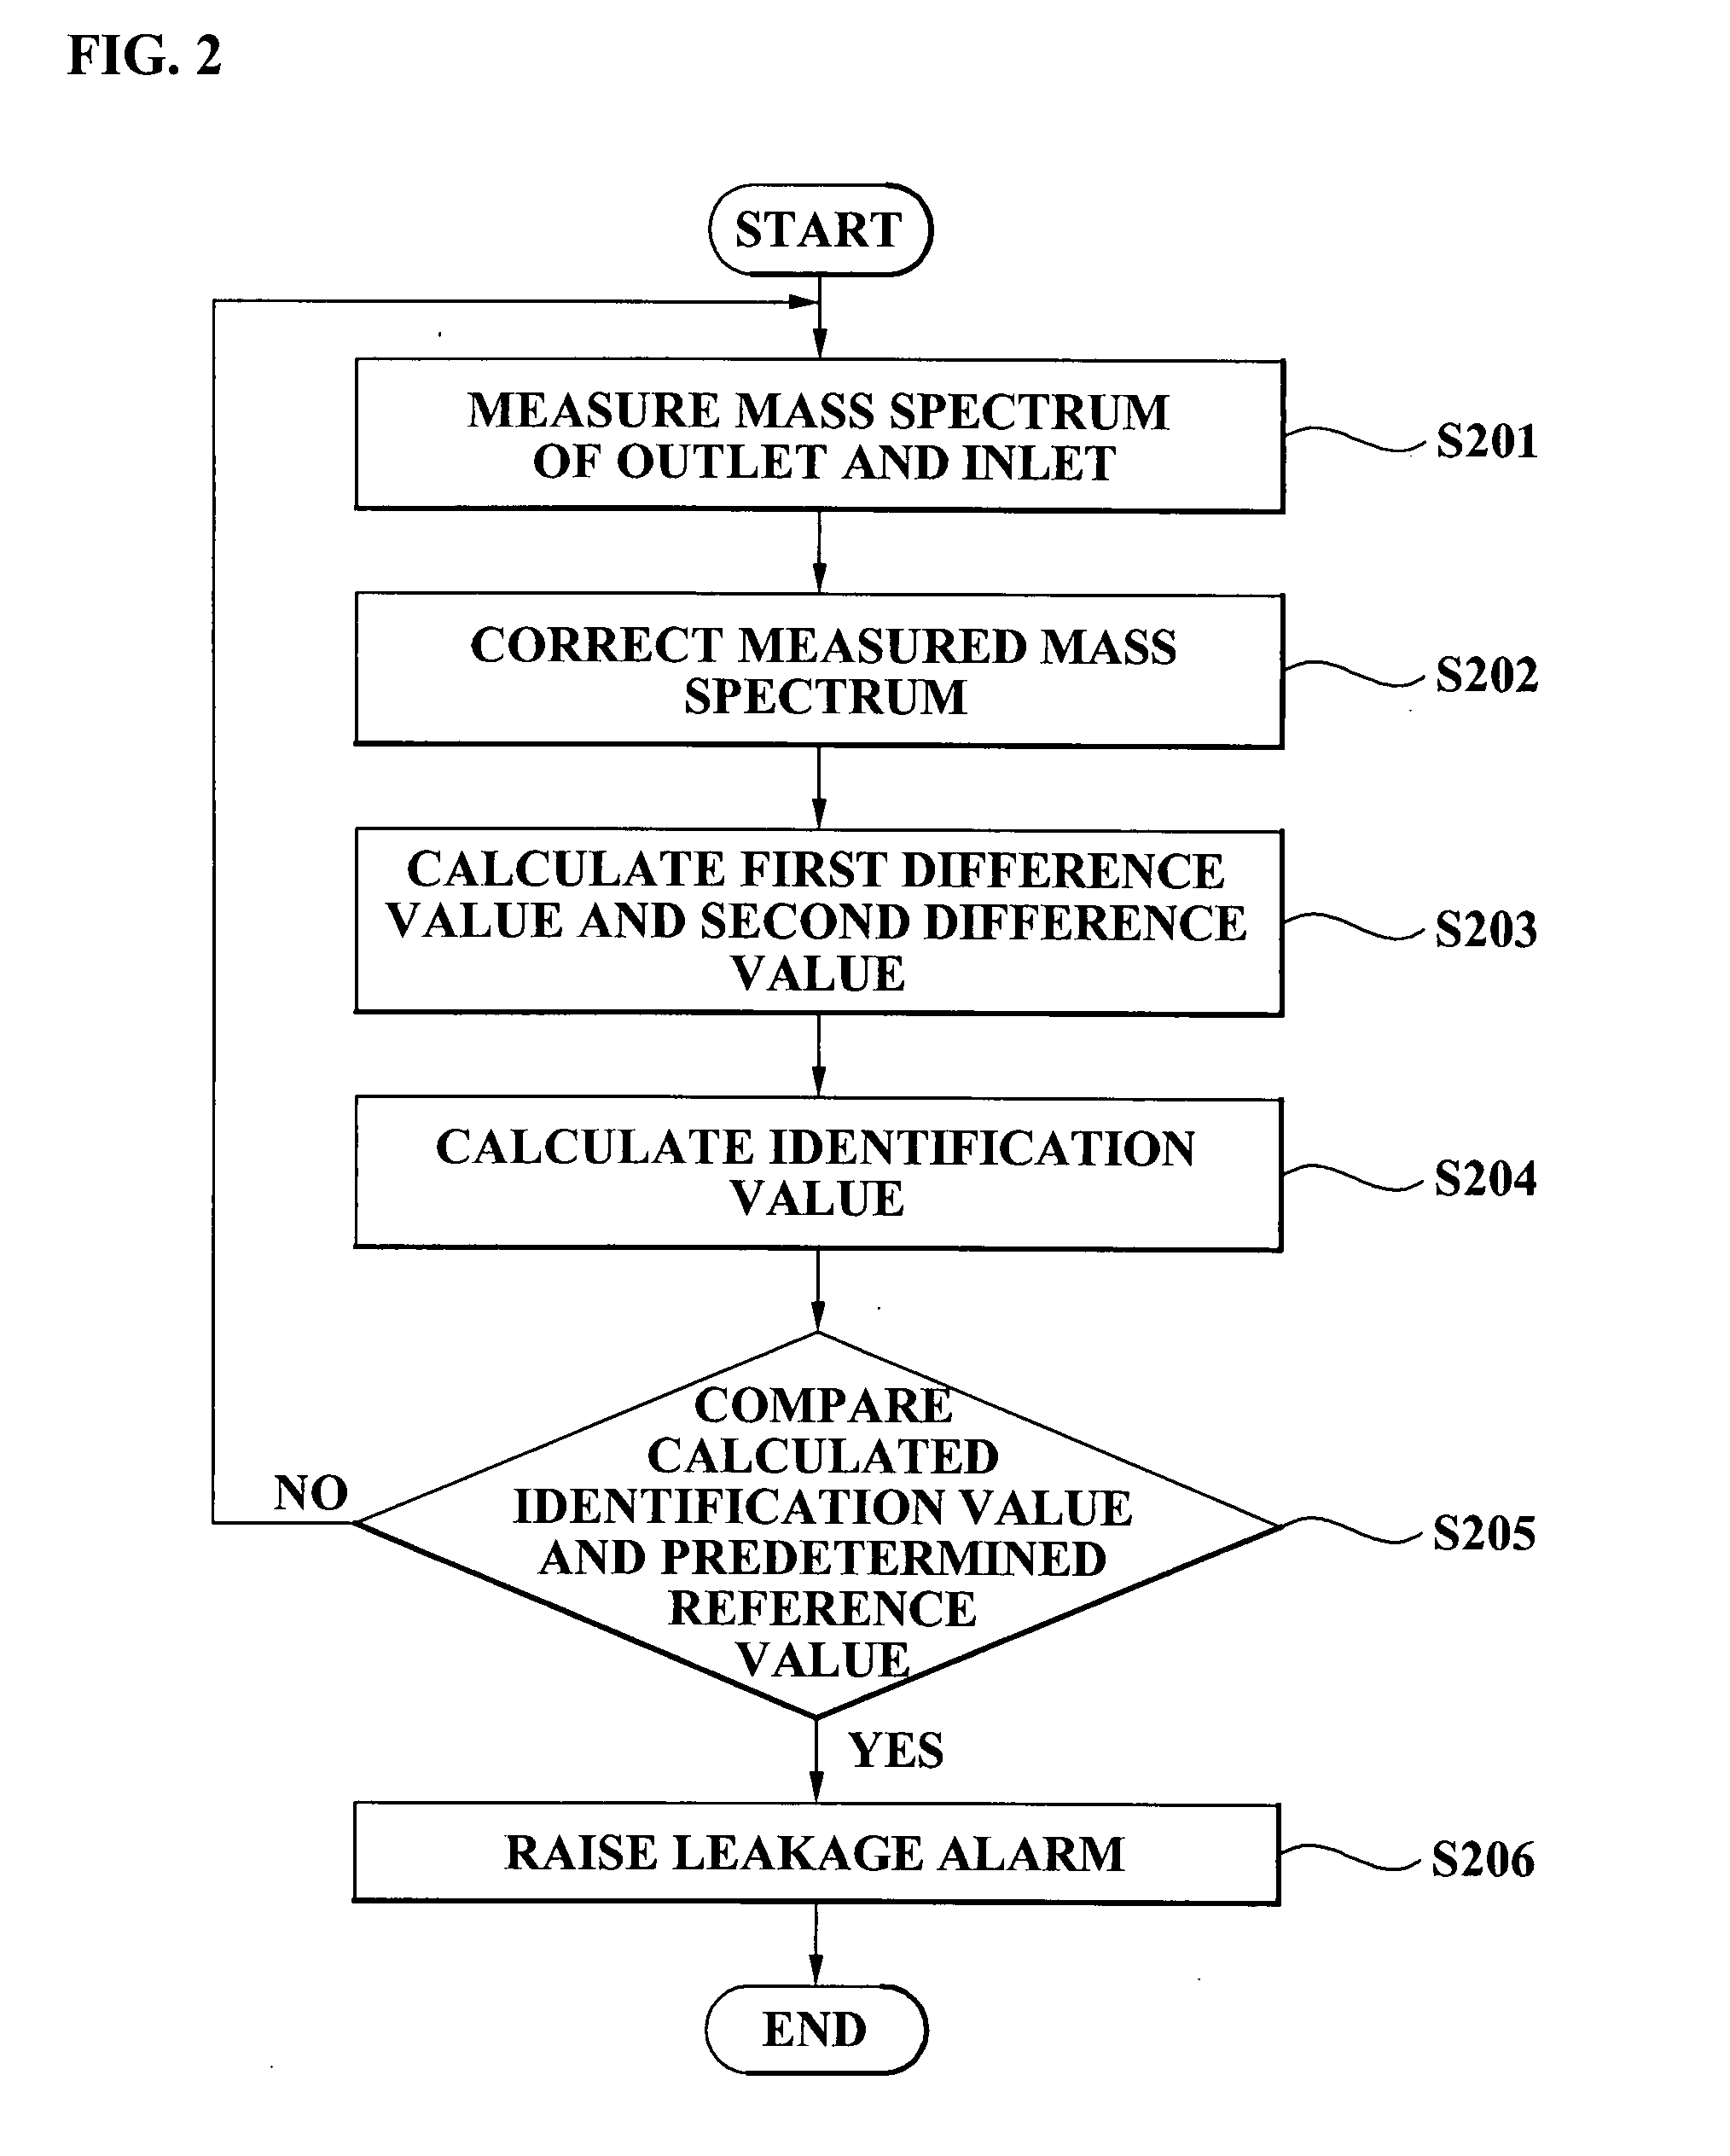 Method and system for early sensing of water leakage, through chemical concentration monitoring, in nuclear reactor system using liquid metal and molten salt